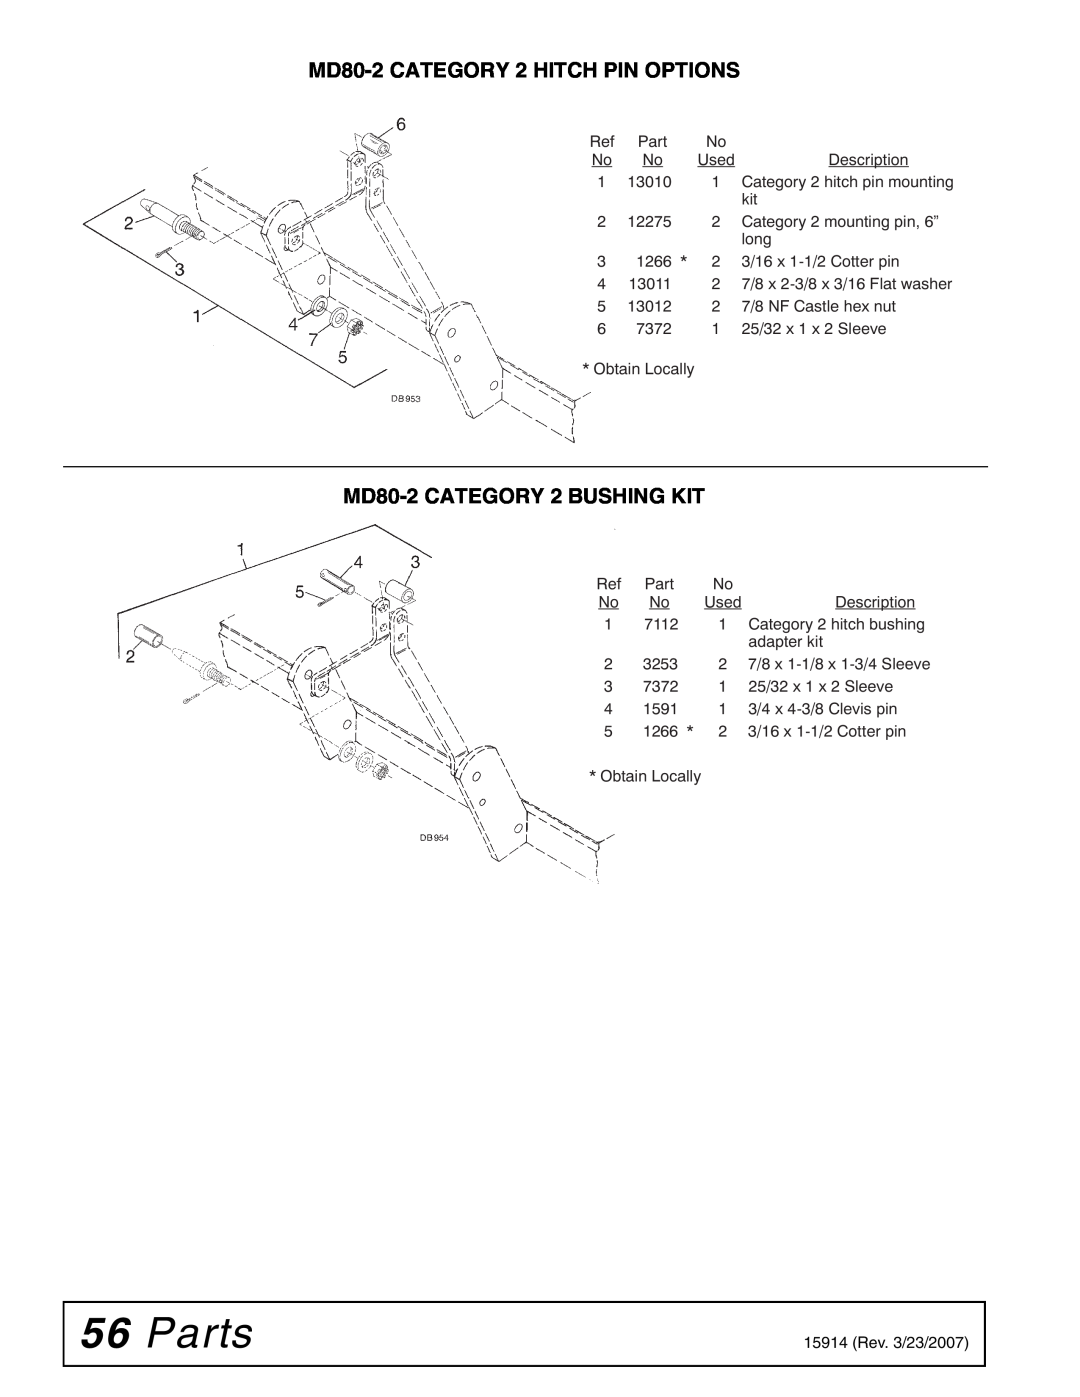 Woods Equipment manual Parts, MD80-2CATEGORY 2 HITCH PIN OPTIONS, MD80-2CATEGORY 2 BUSHING KIT 